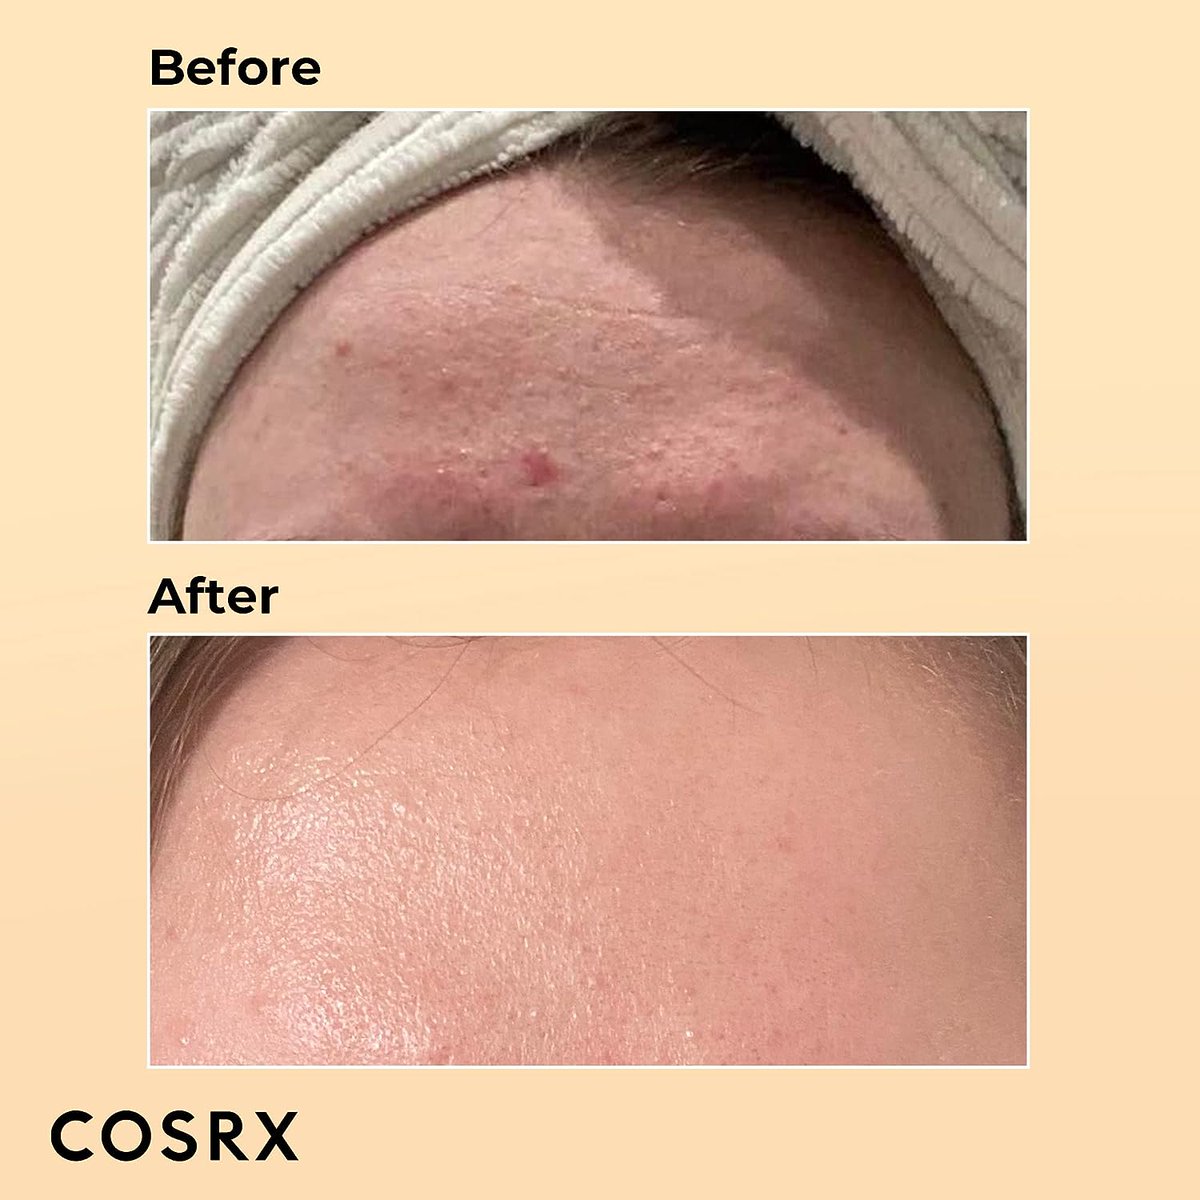 #Wheretobuy 'Revitalize your skin with COSRX Snail Mucin Essence! 🐌✨ This hydrating serum packs 96% snail secretion filtrate to combat dullness and fine lines.  #COSRX #SnailMucin #KoreanSkincare #Hydration #SkinRepair' get now amzn.to/3VVSM3x